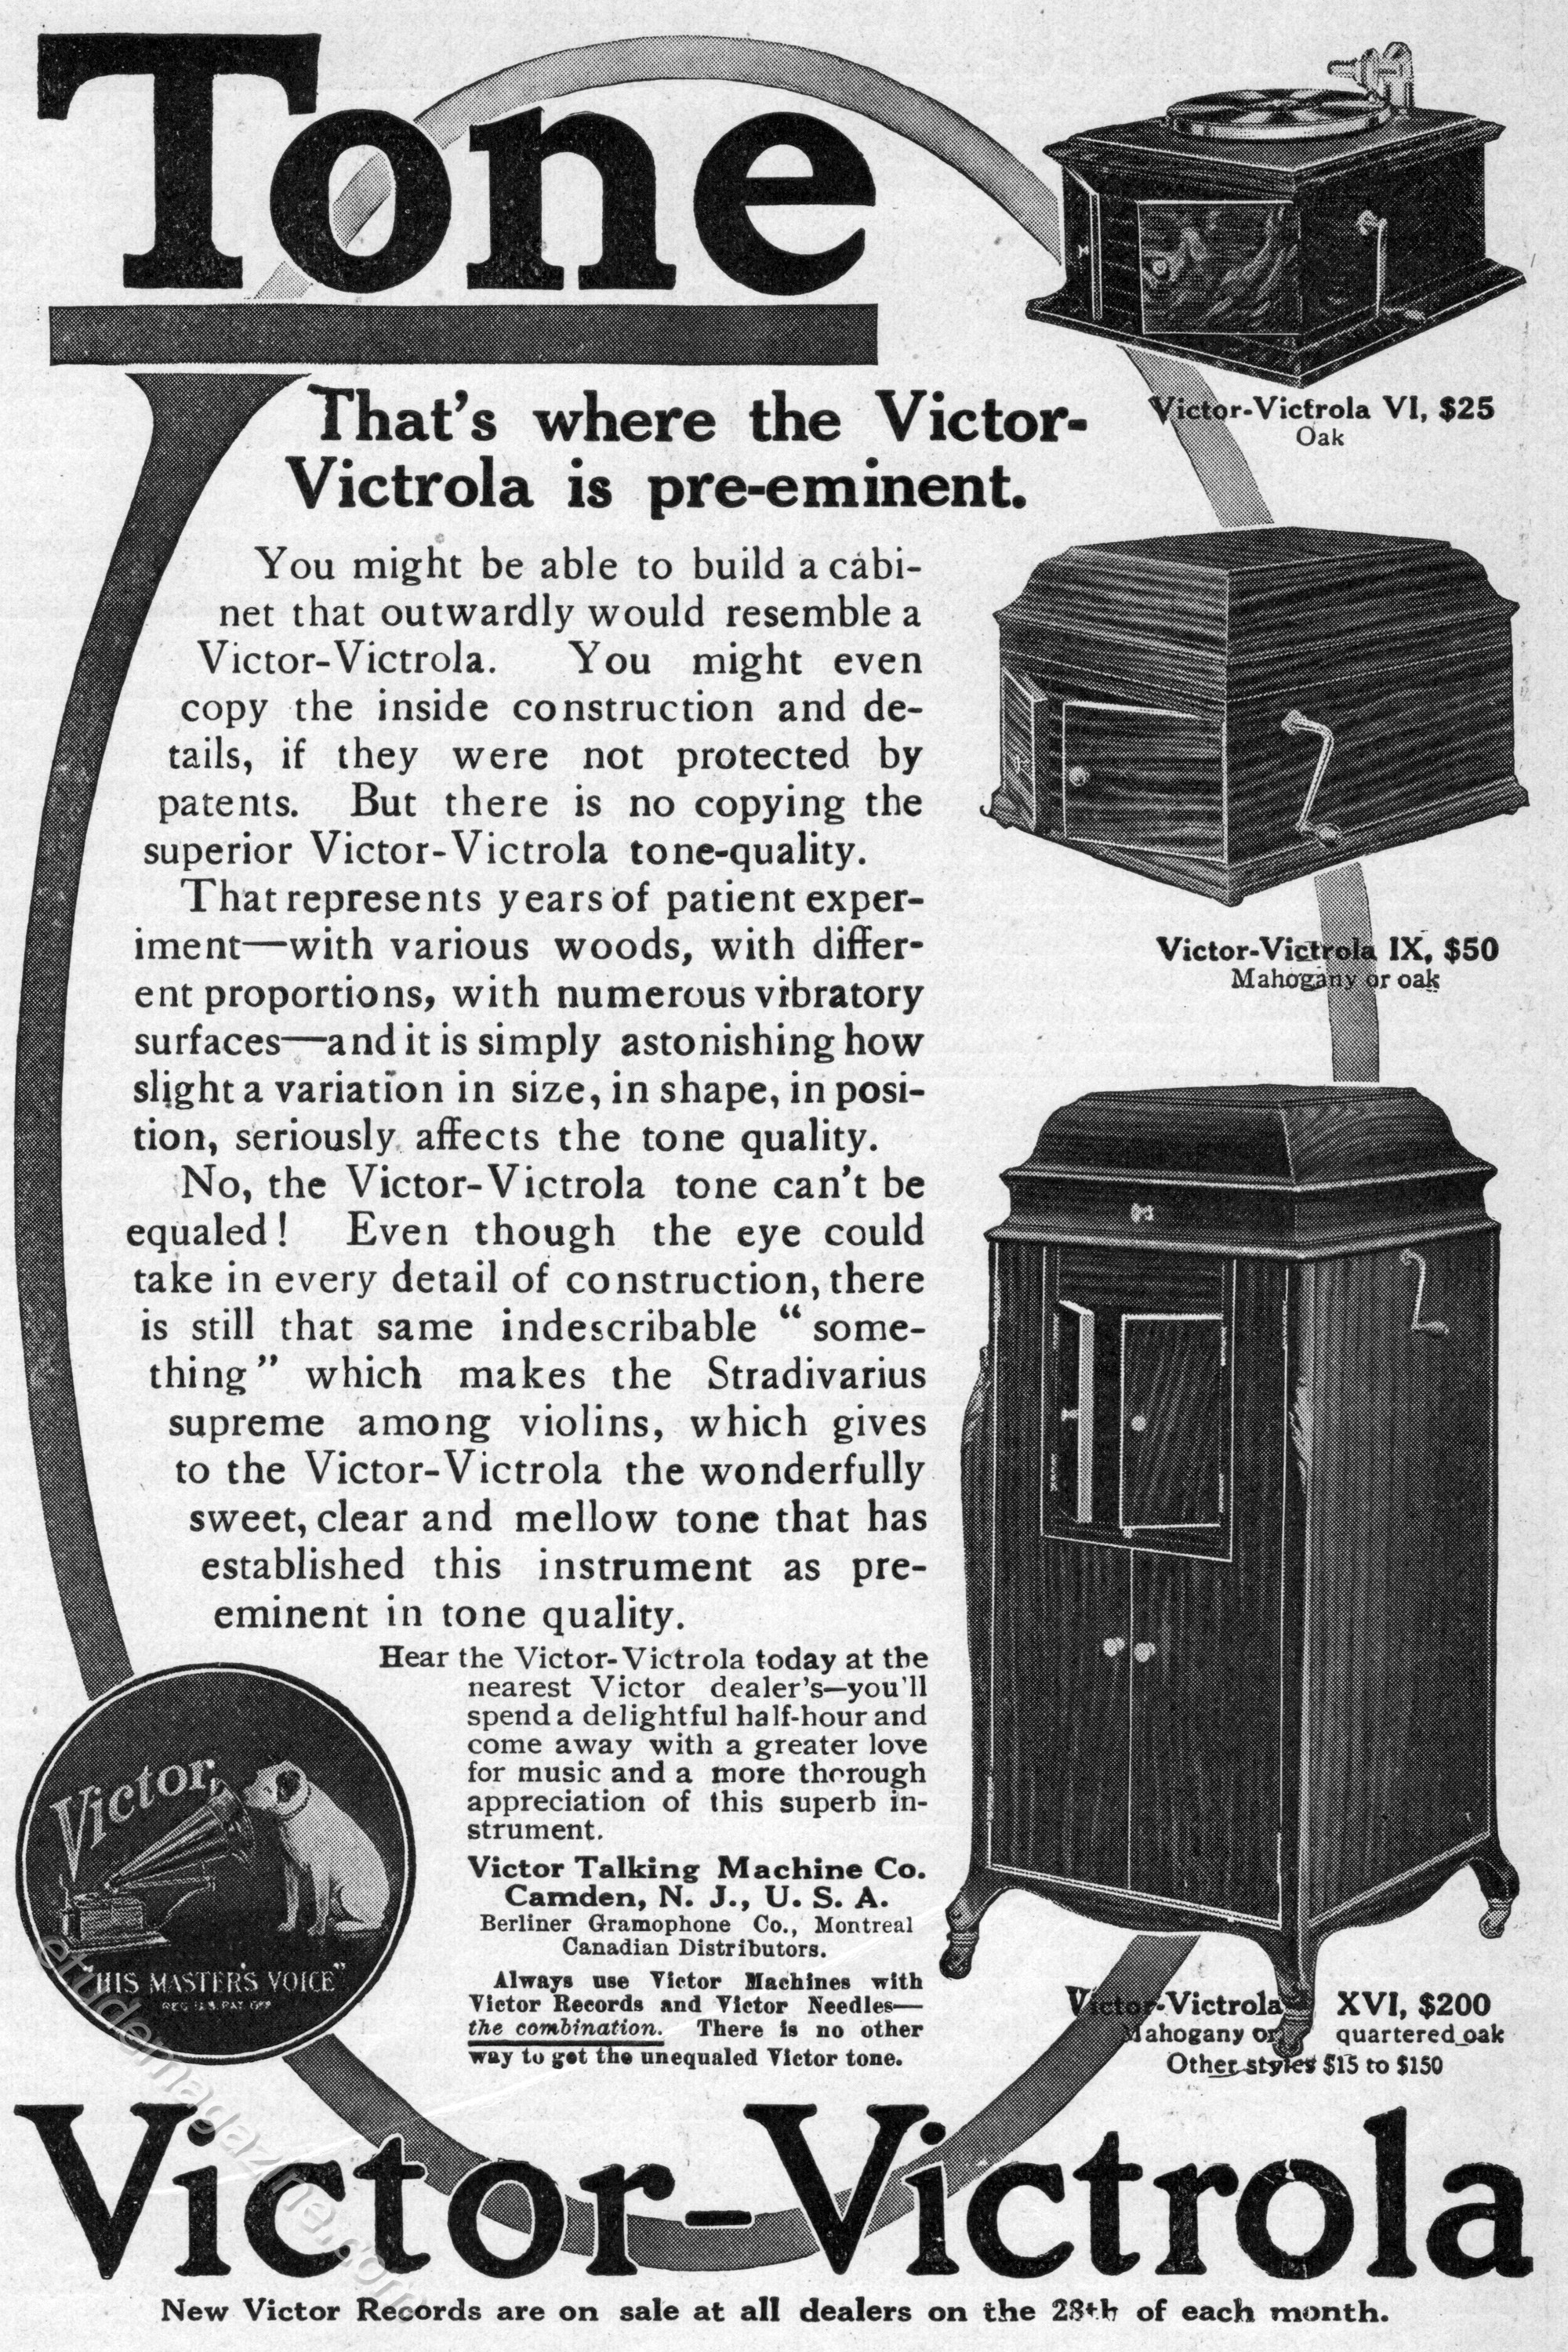 TONE. That's where the Victor-Victrola is pre-eminent